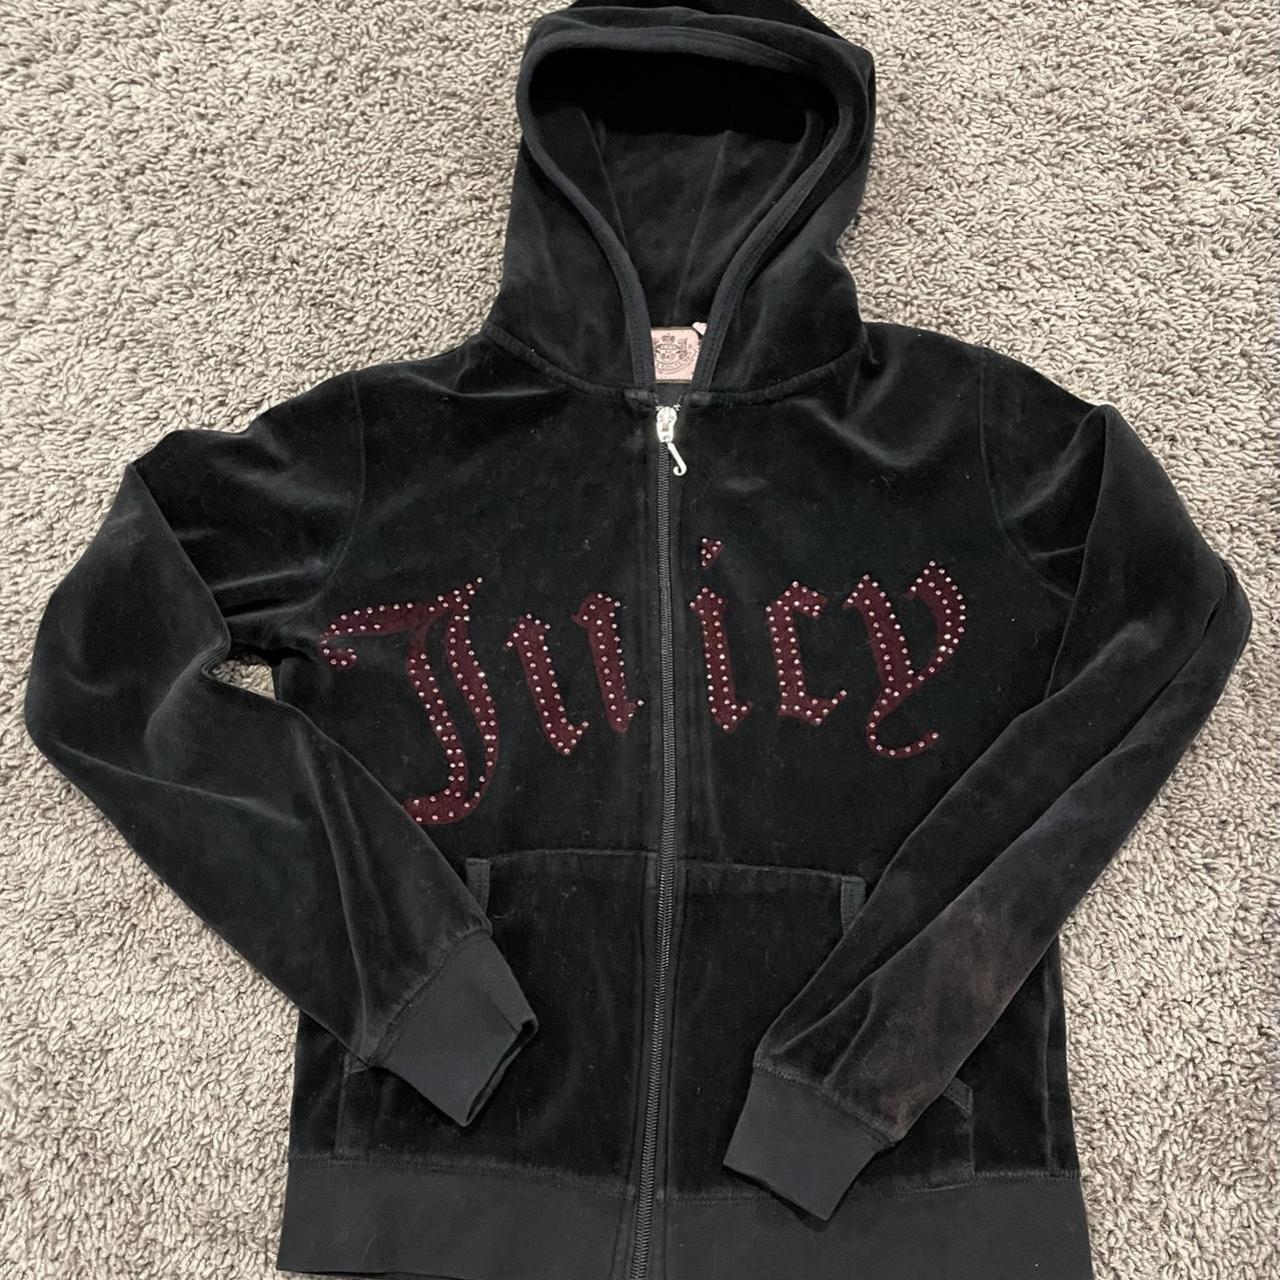 Juicy Couture Women's Black and Pink Jacket | Depop